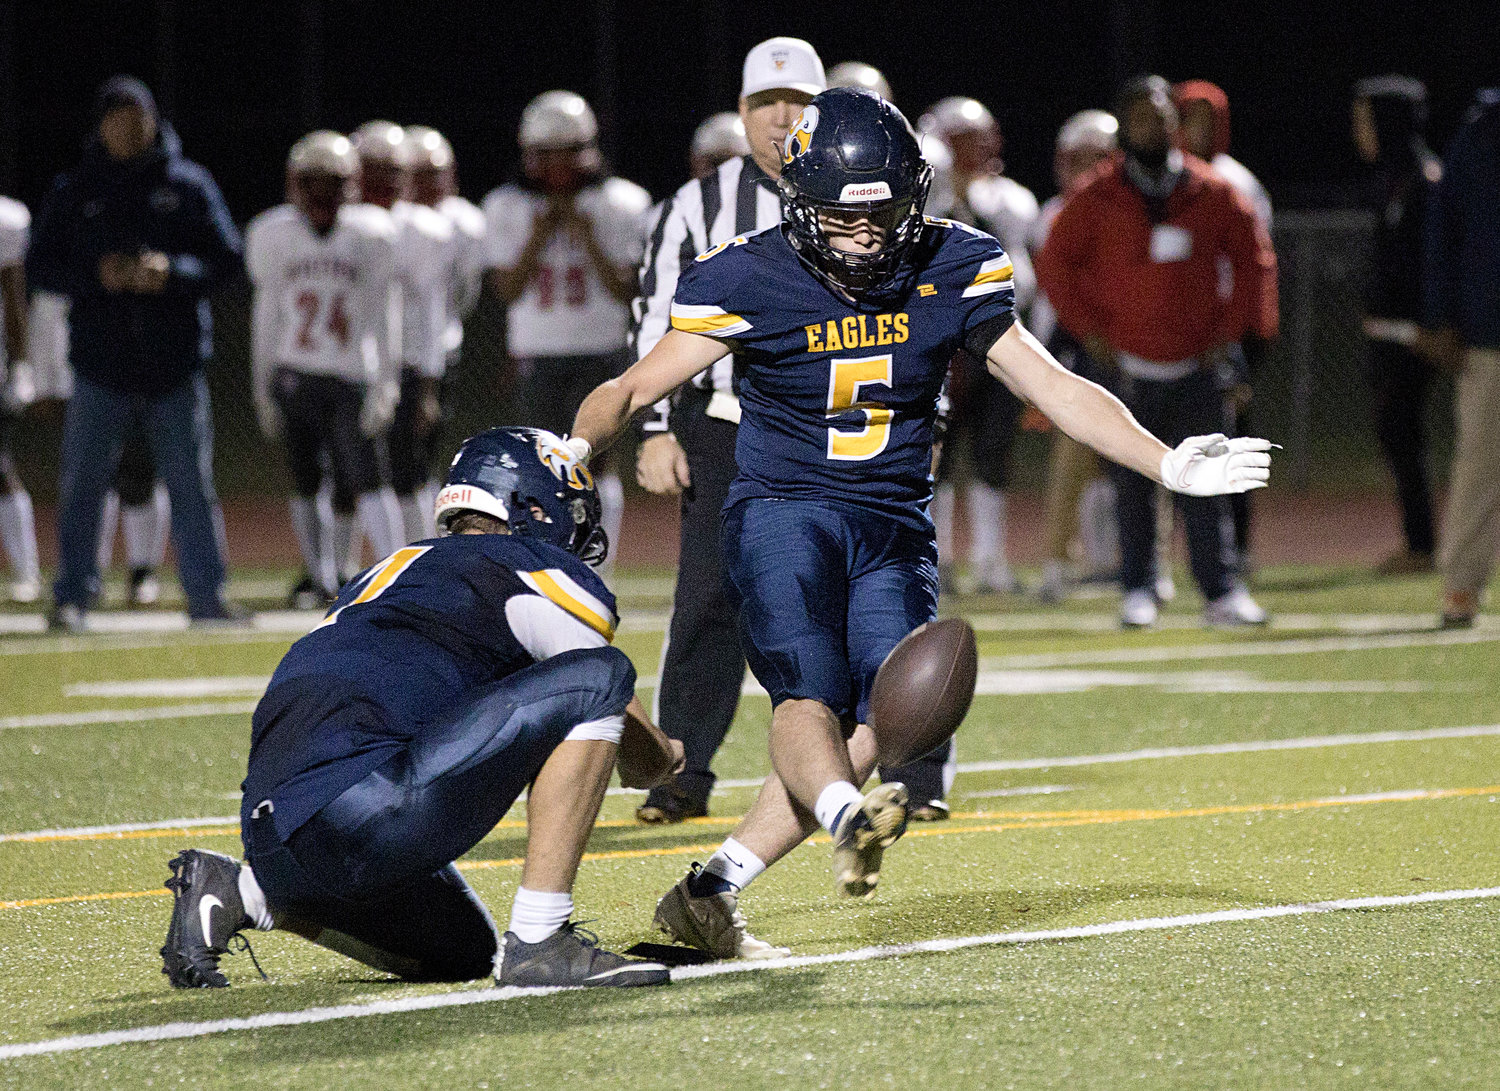 Will Hopkins kicks an extra point during the first half of the game against Mt. Pleasant.